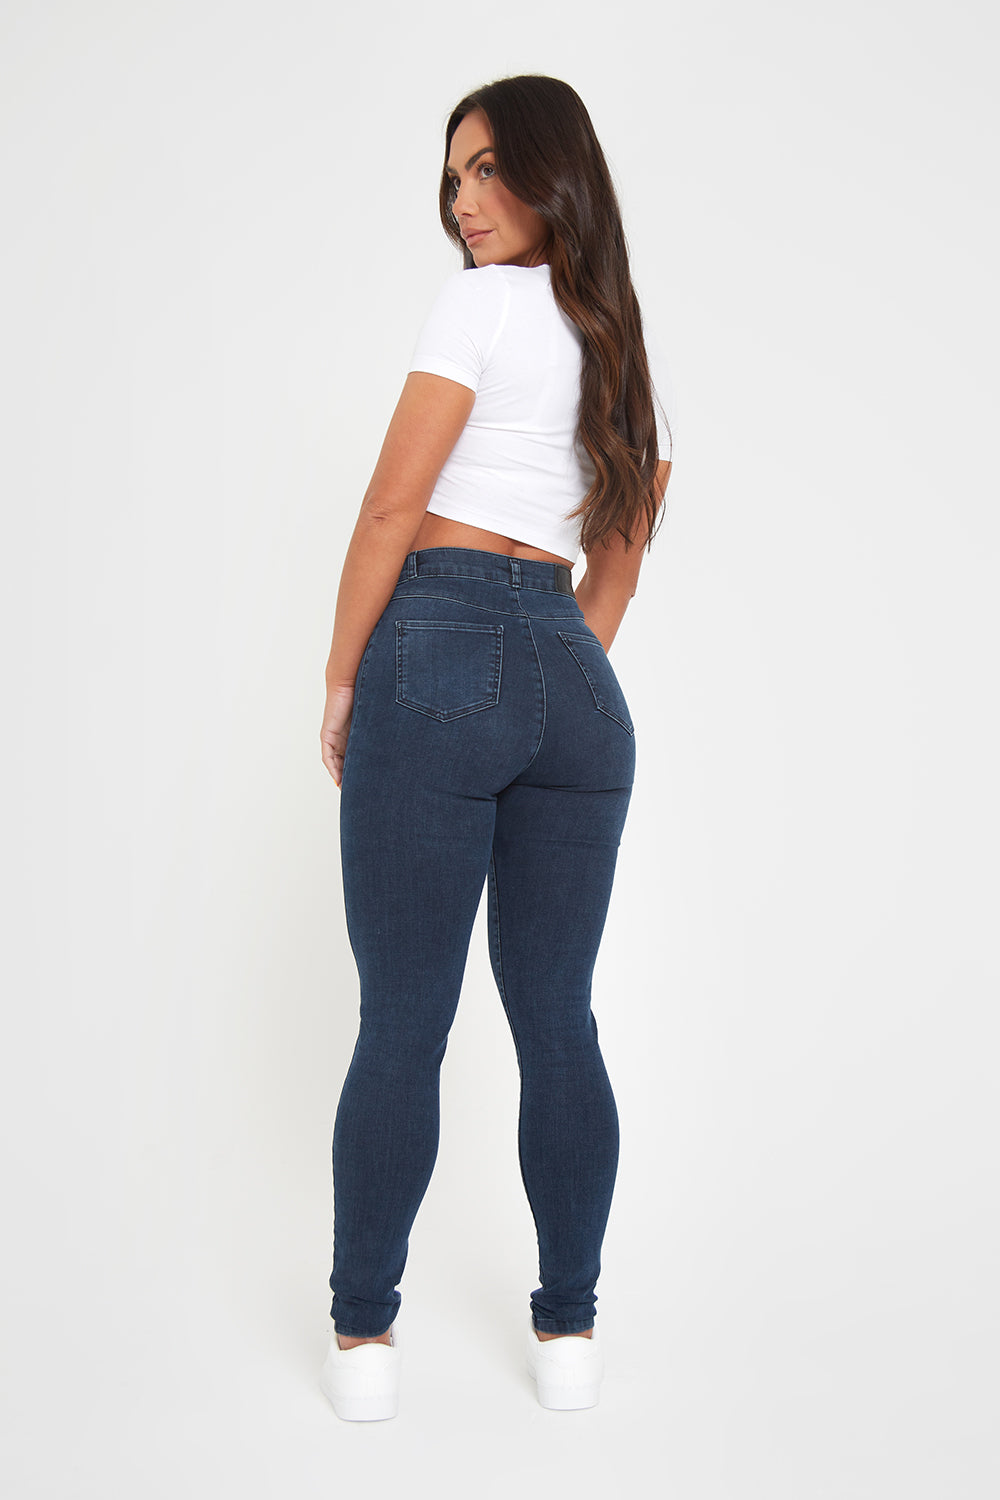 Tailored Athlete High Waisted Jeans in Dark Blue, M